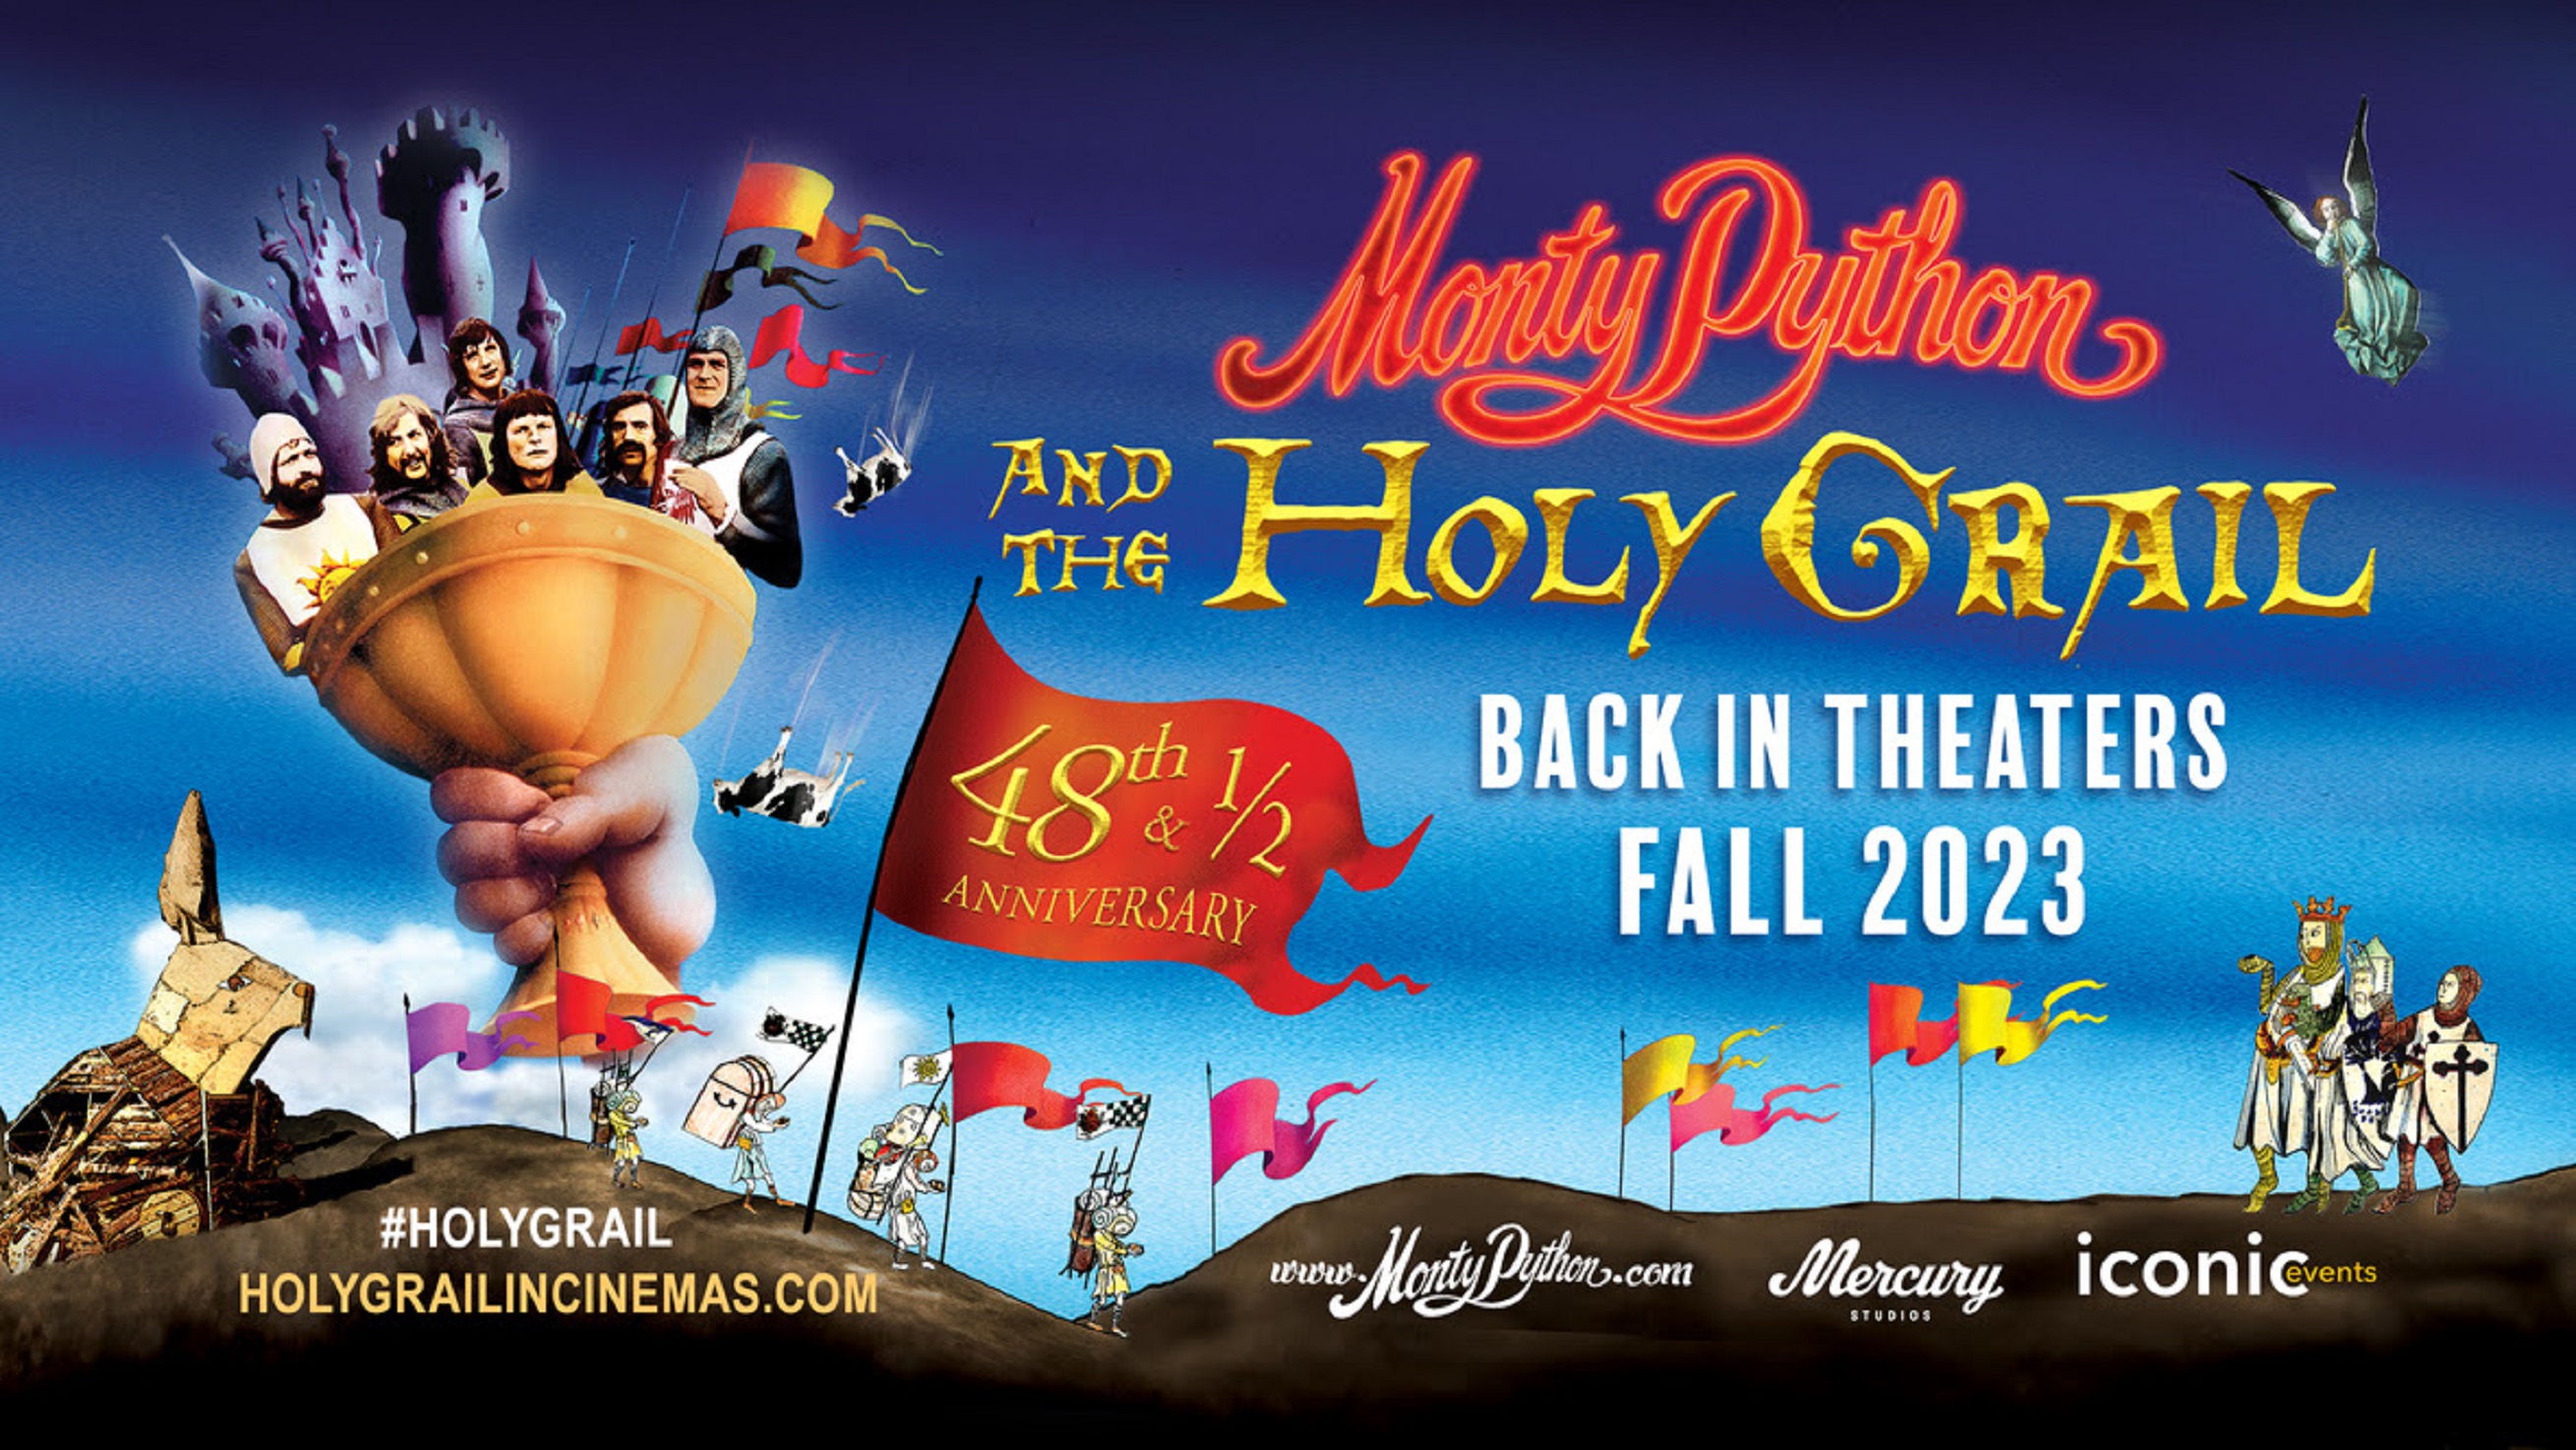 THE 48 ½ YEAR ANNIVERSARY OF MONTY PYTHON AND THE HOLY GRAIL NATIONWIDE FILM RELEASE DECEMBER 2023